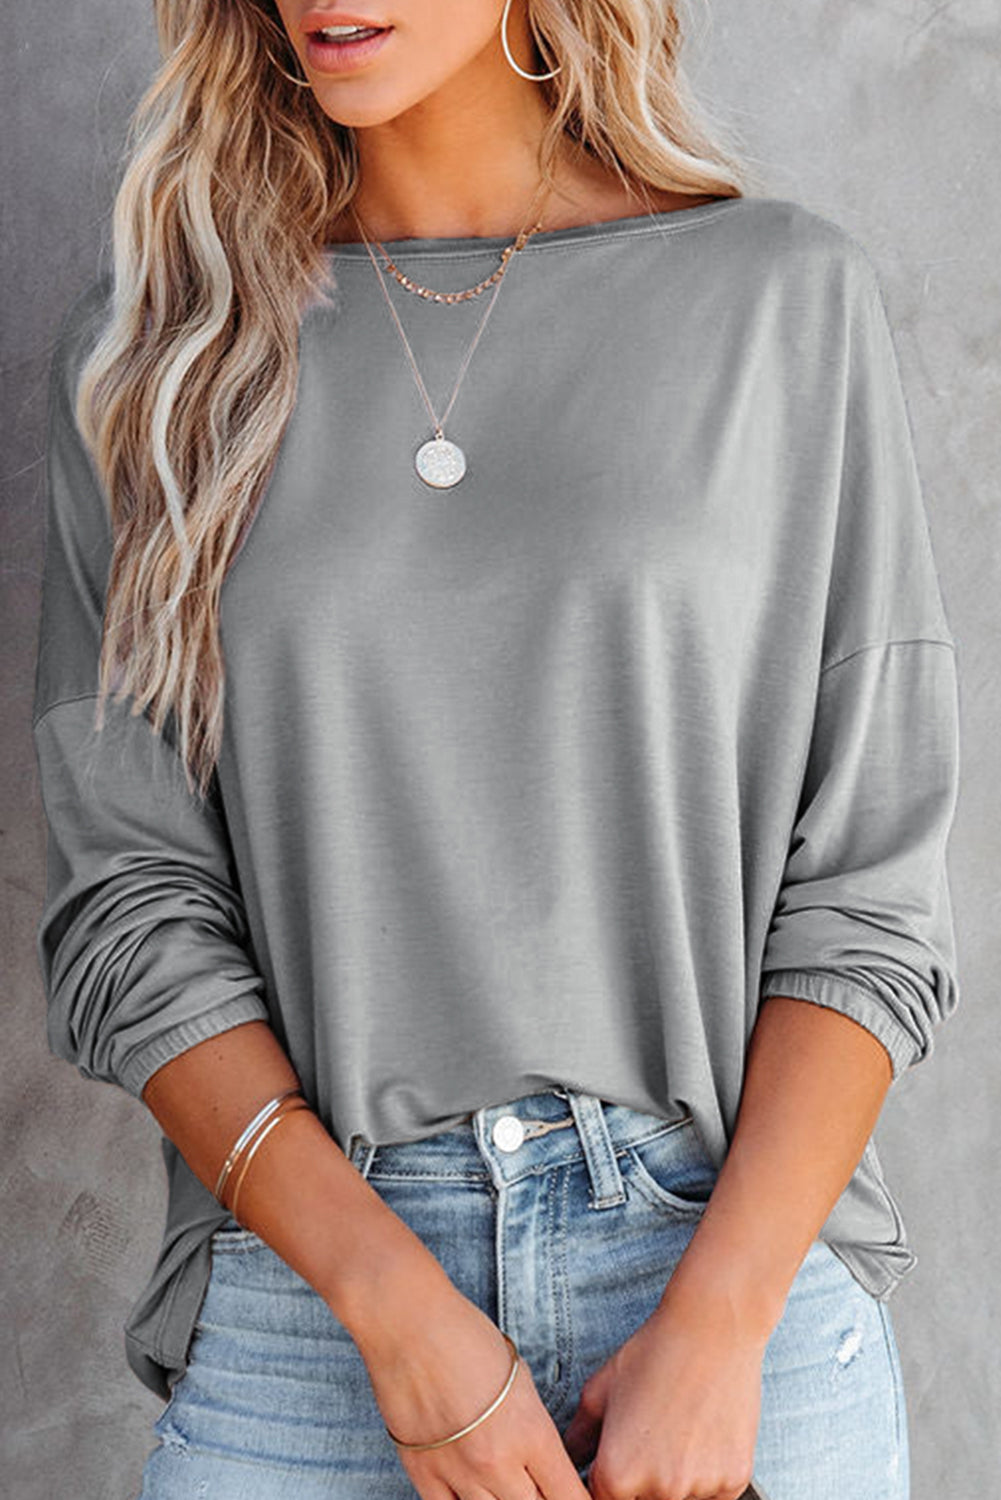 Gray Loose Fit Wide Neck Batwing Sleeves Top Item NO.: 7142